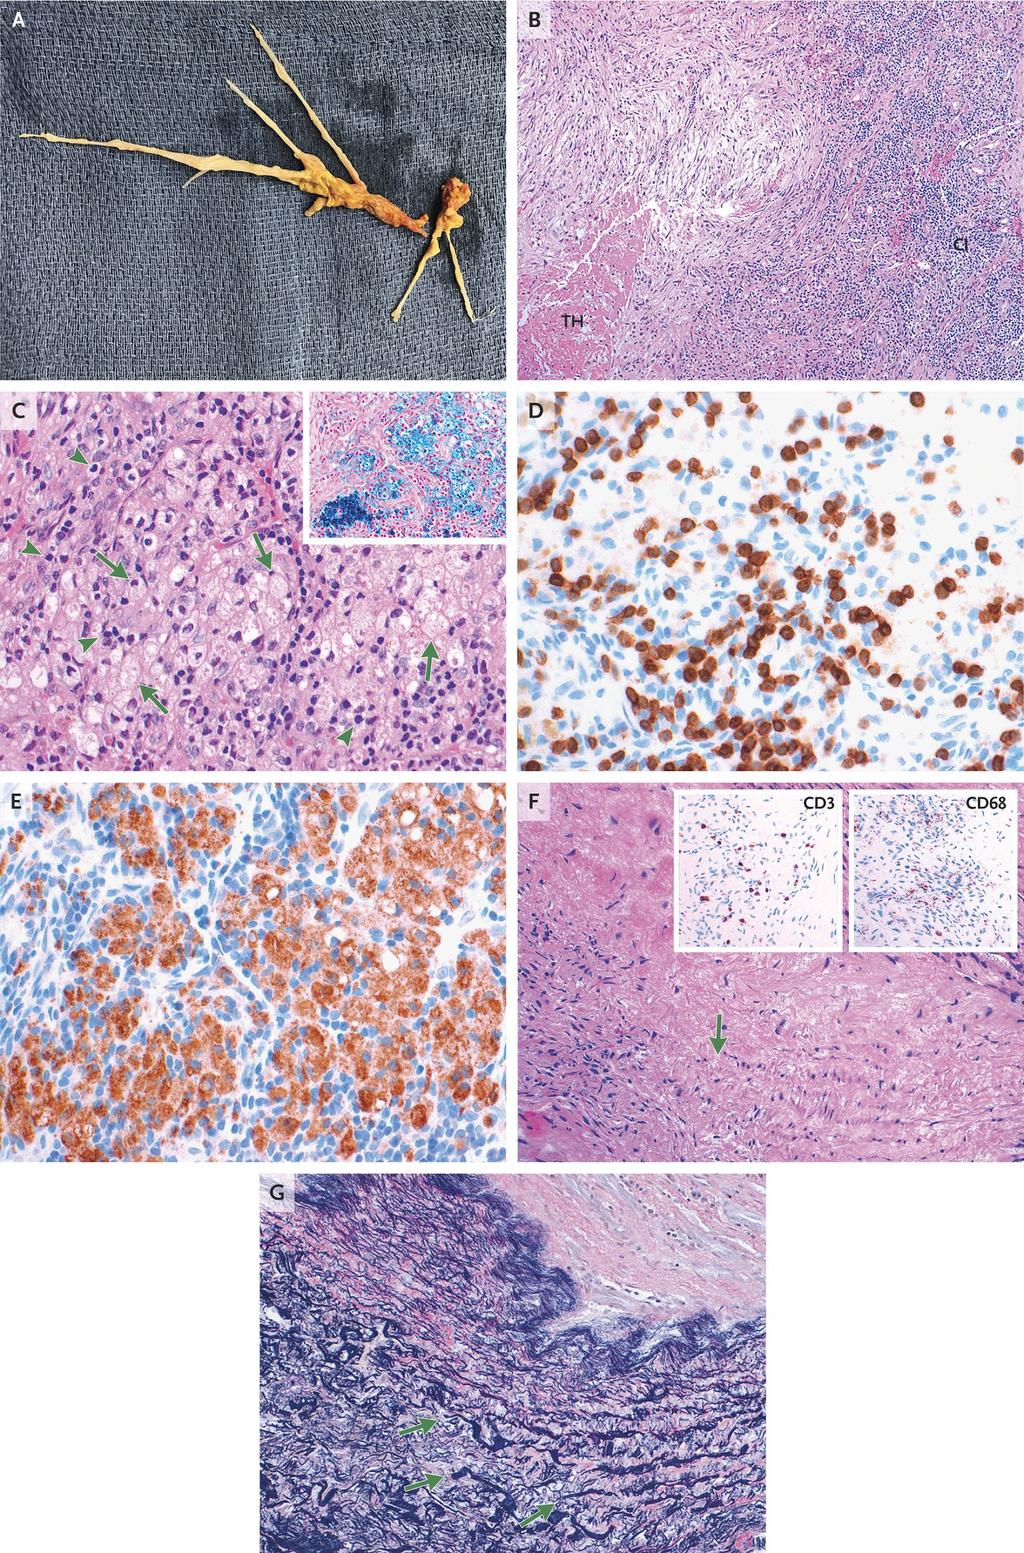 Pathological Discussion The biopsy specimen (Panel A) included organizing thrombus and inflammation which in turn included Tlymphocytes, hemosiderin-containing macrophages, and some plasma cells No